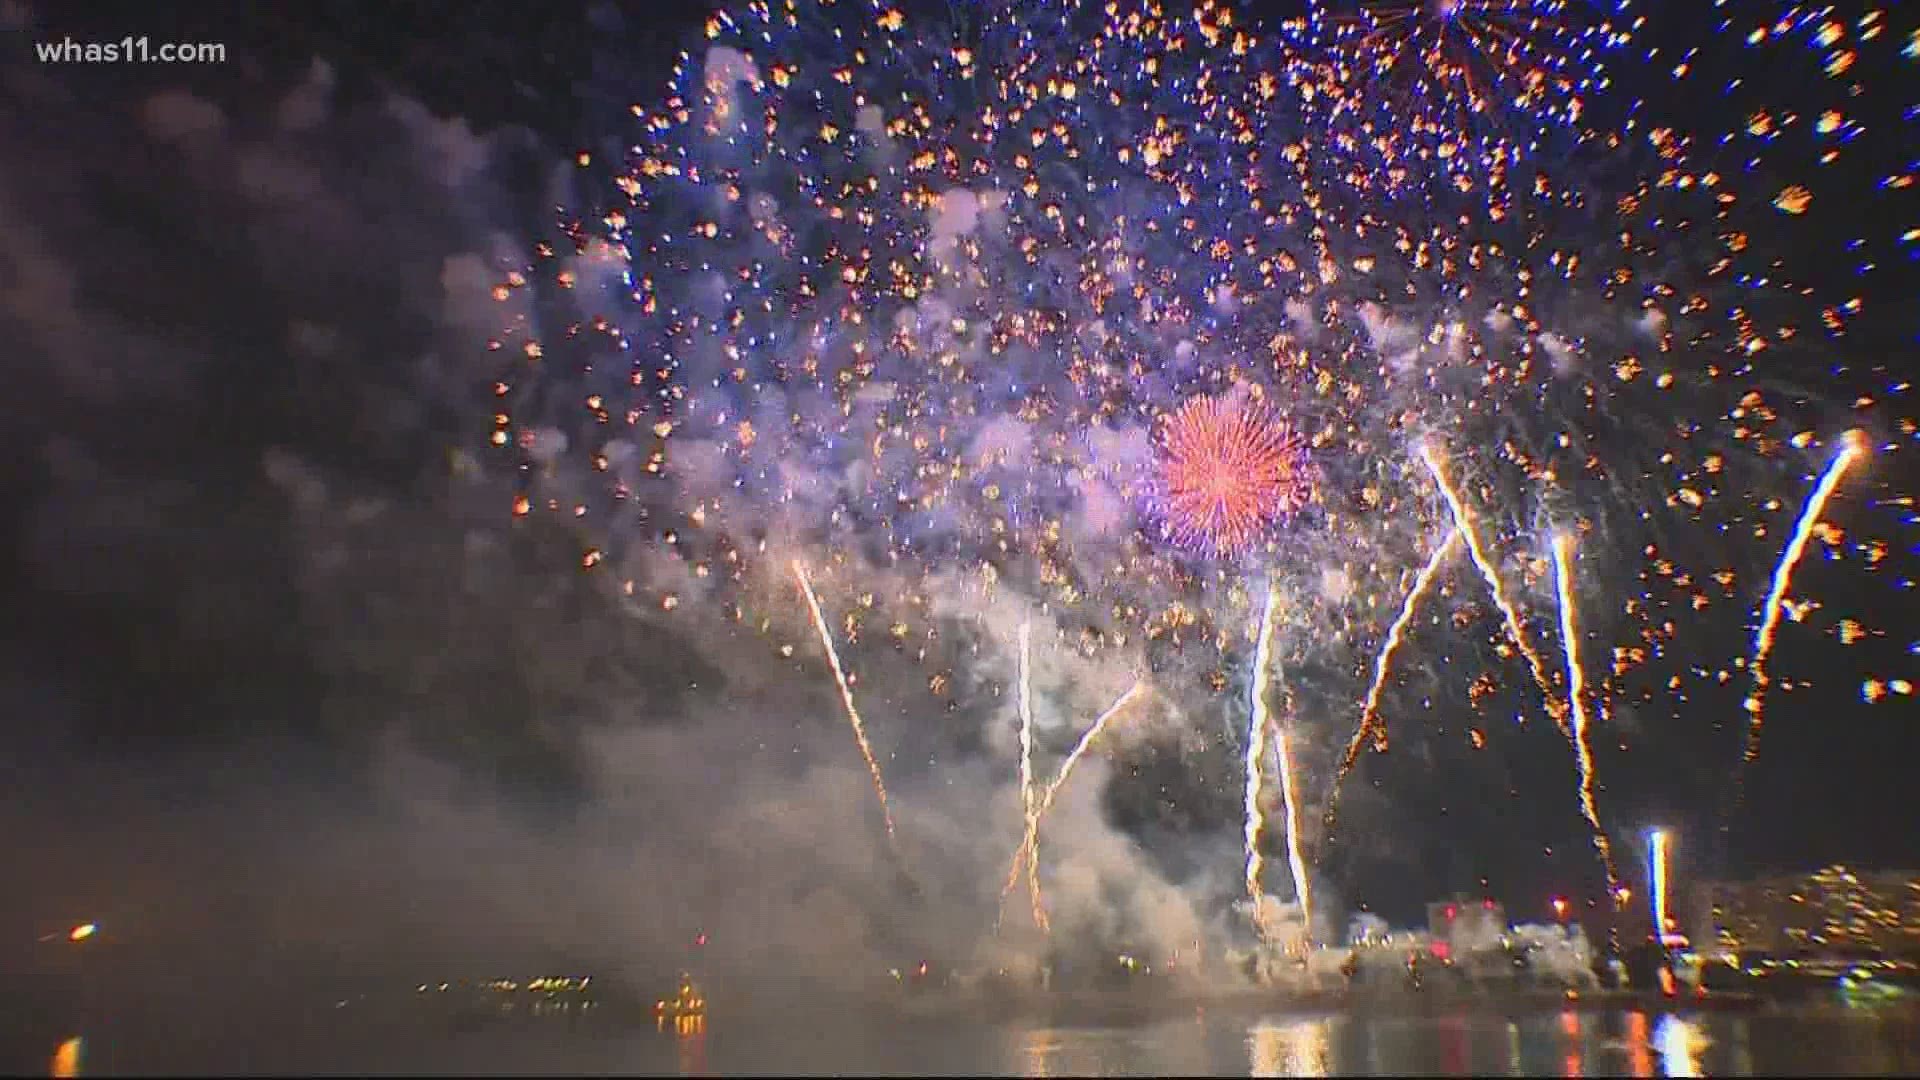 This year's theme for Thunder Over Louisville is "Illuminating our Community." Event organizers said they hope the show will do just that - light up the community af